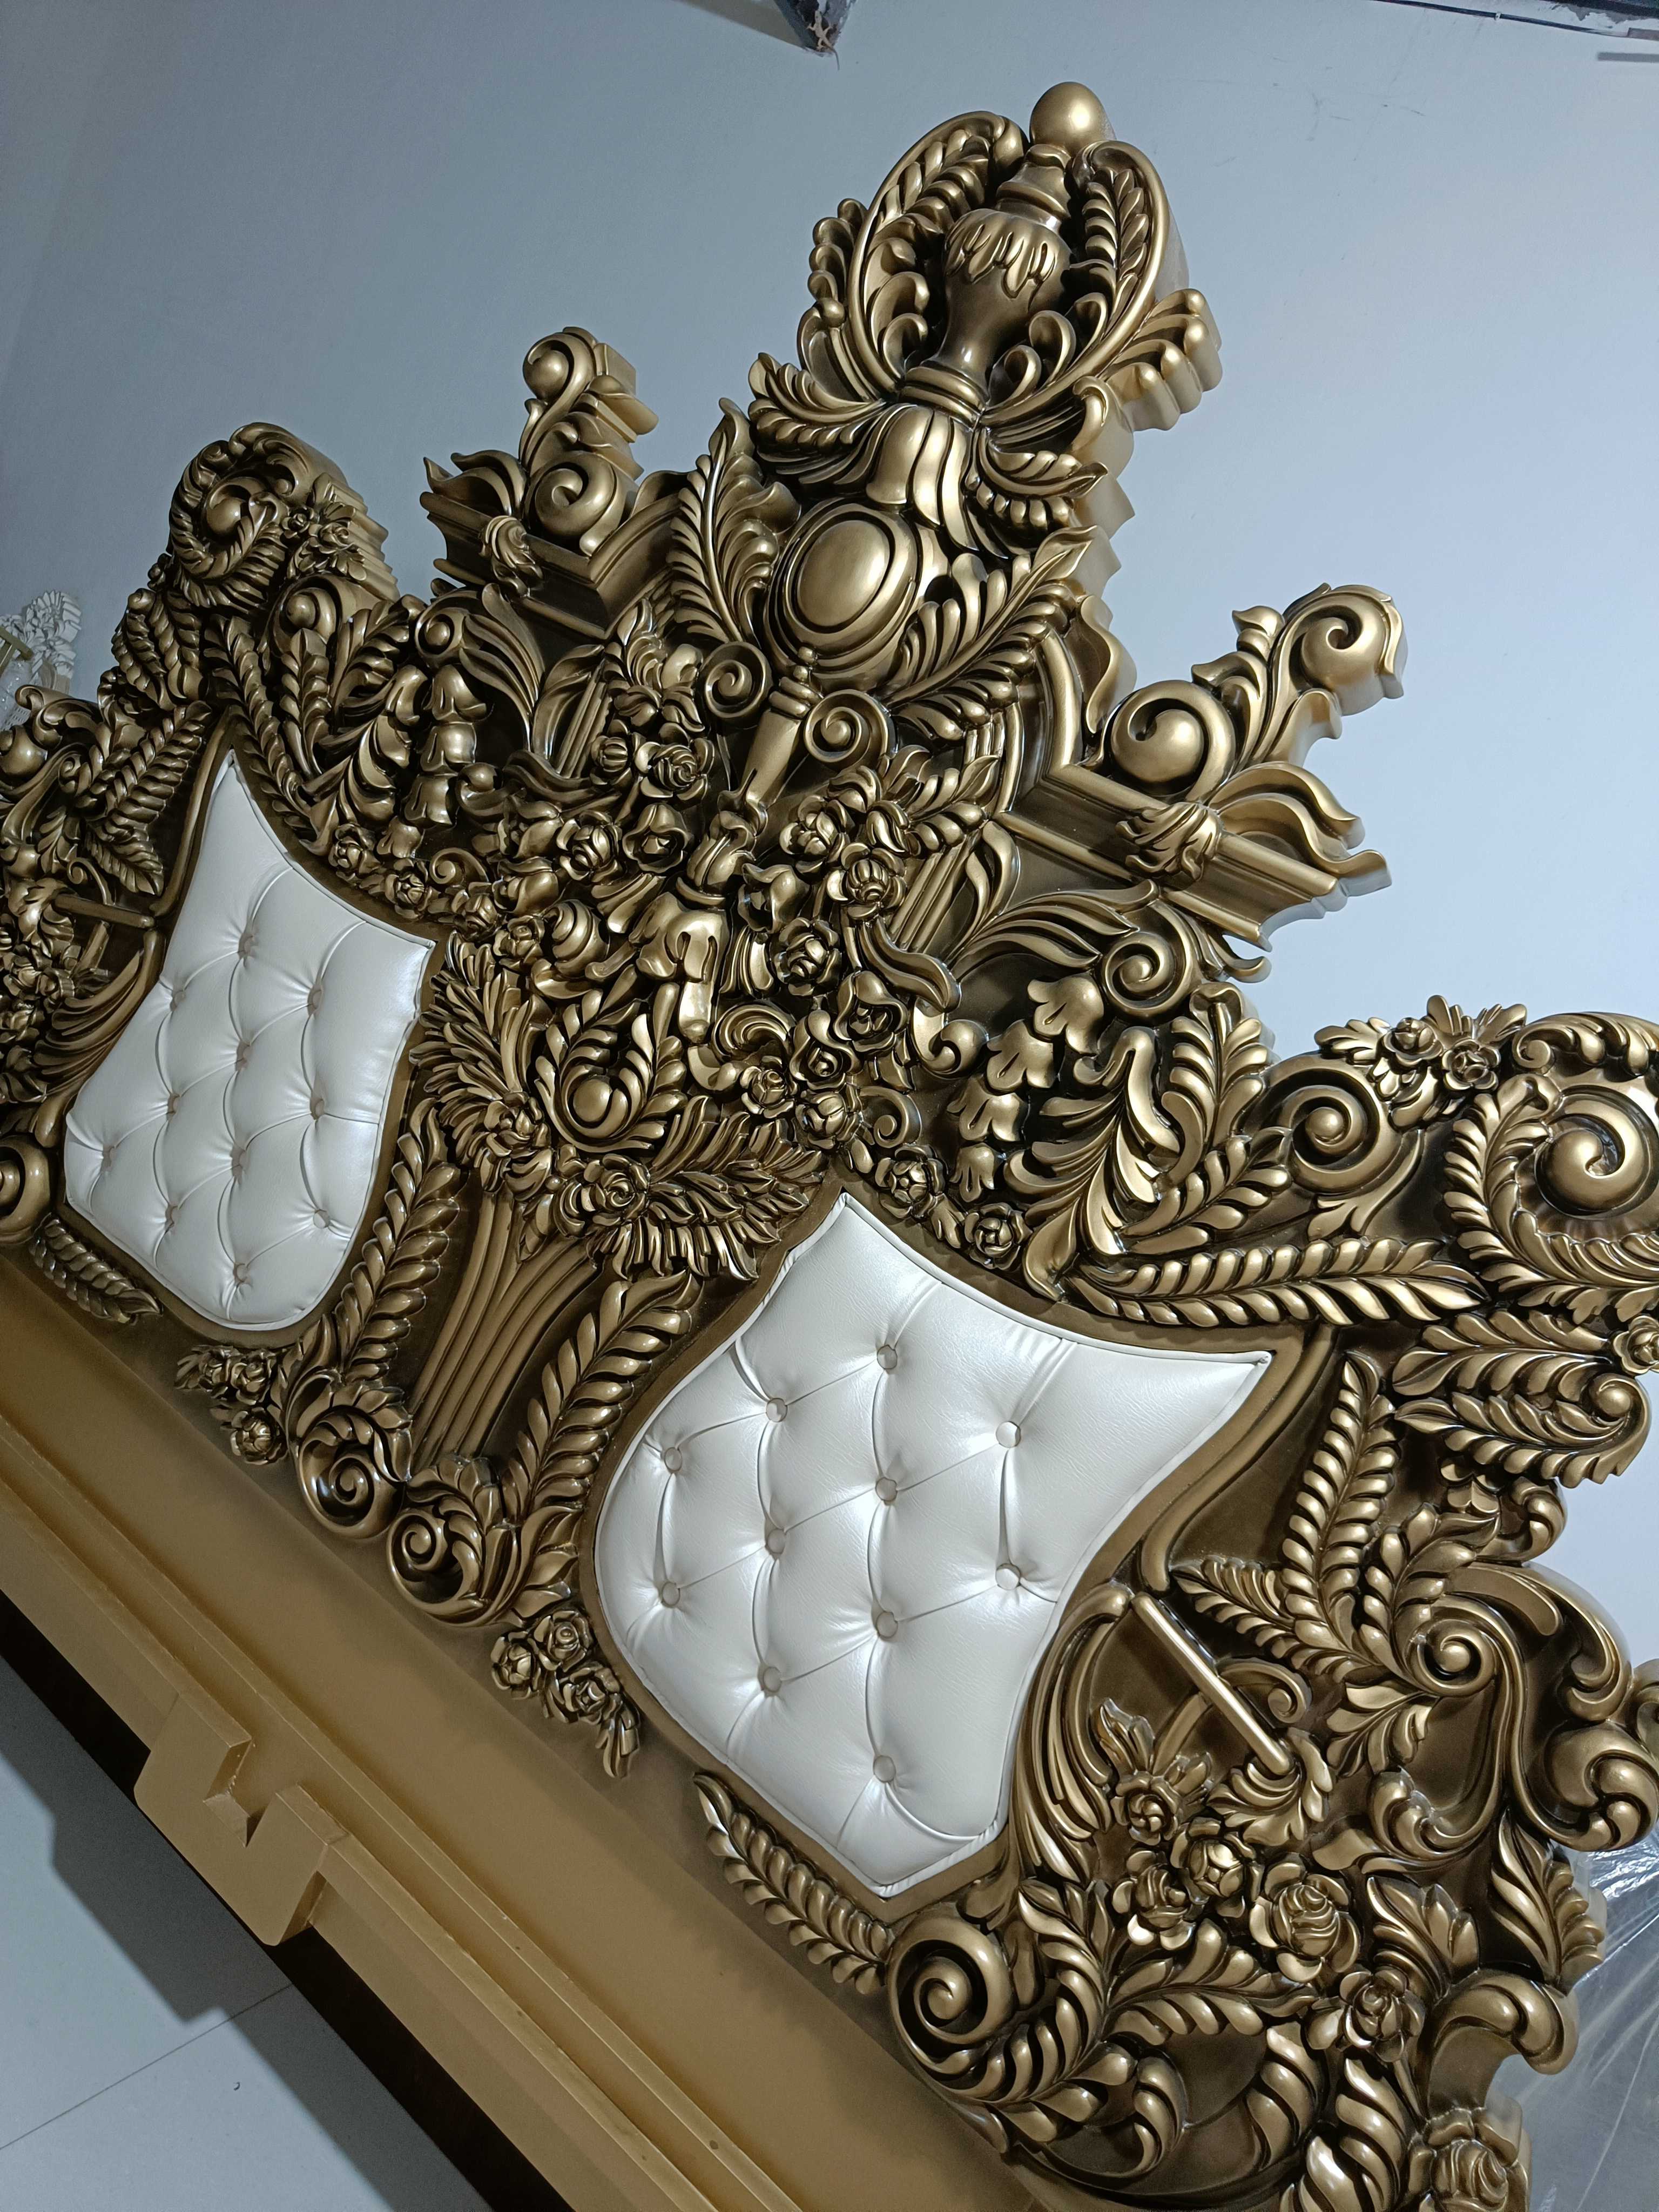 Royal bed Handcrafted maharaja Design made of premium Quality teak Wood - Baroque Style Carving with metallic Gold color and White Tufted Leather - Carved in India Brand Royalzig Luxury Furniture 